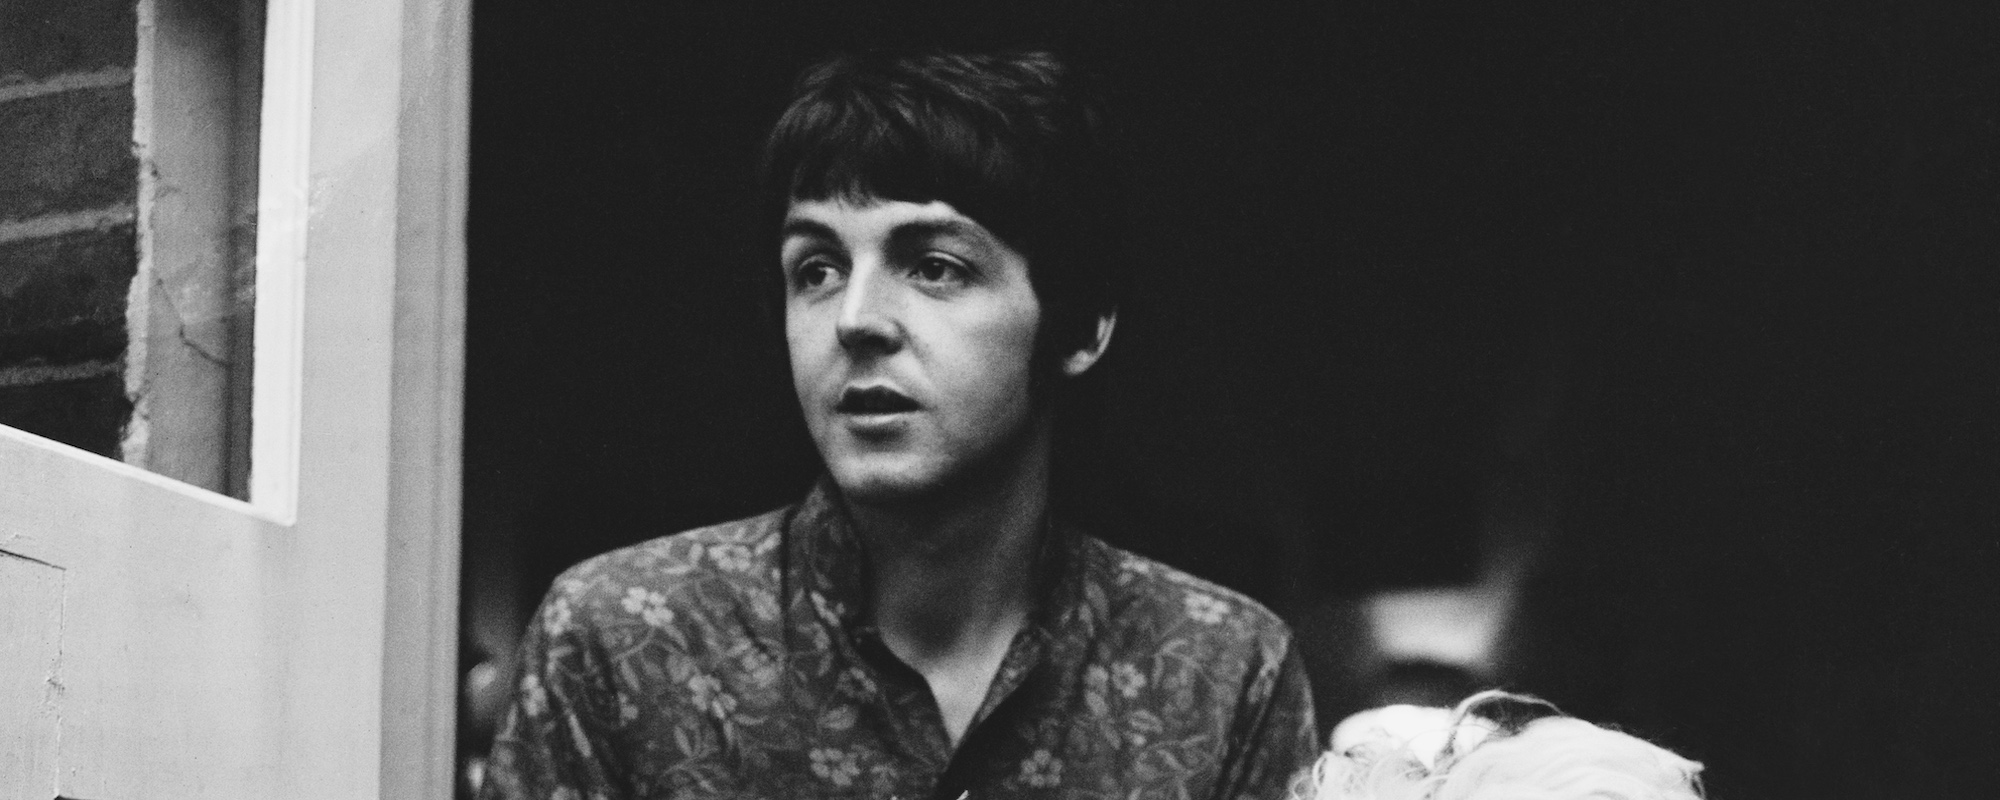 On This Day: Paul McCartney Sued The Beatles, to “Save” the Band’s Music